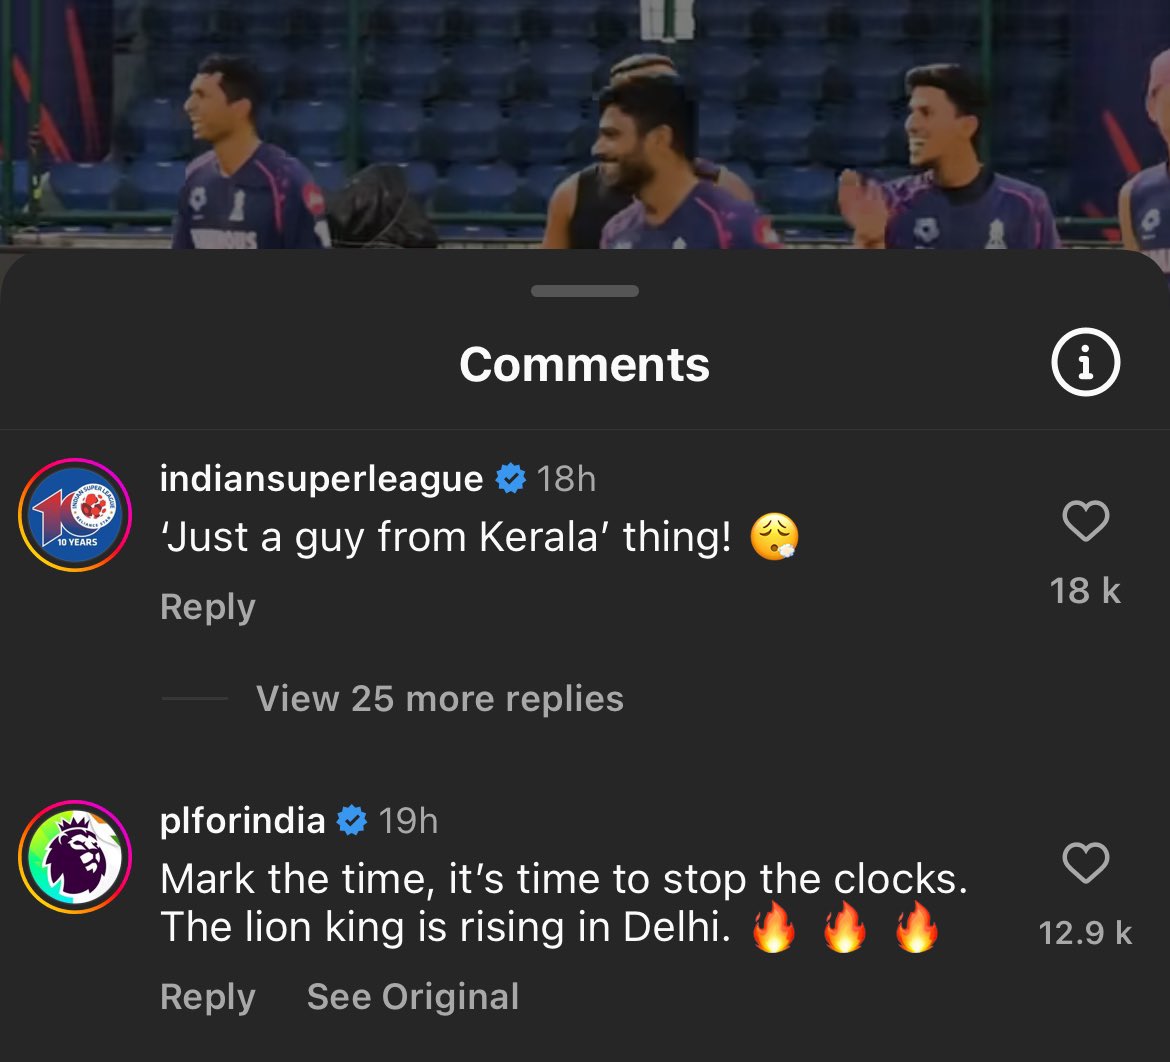 Premier League For India Comments For Sanju Samson “The Lion King Is Rising In Delhi”

Indian Super League Also Commented “Just A Guy From Kerala”

Burnol stocks among Samson haters 📈📈

@PLforIndia